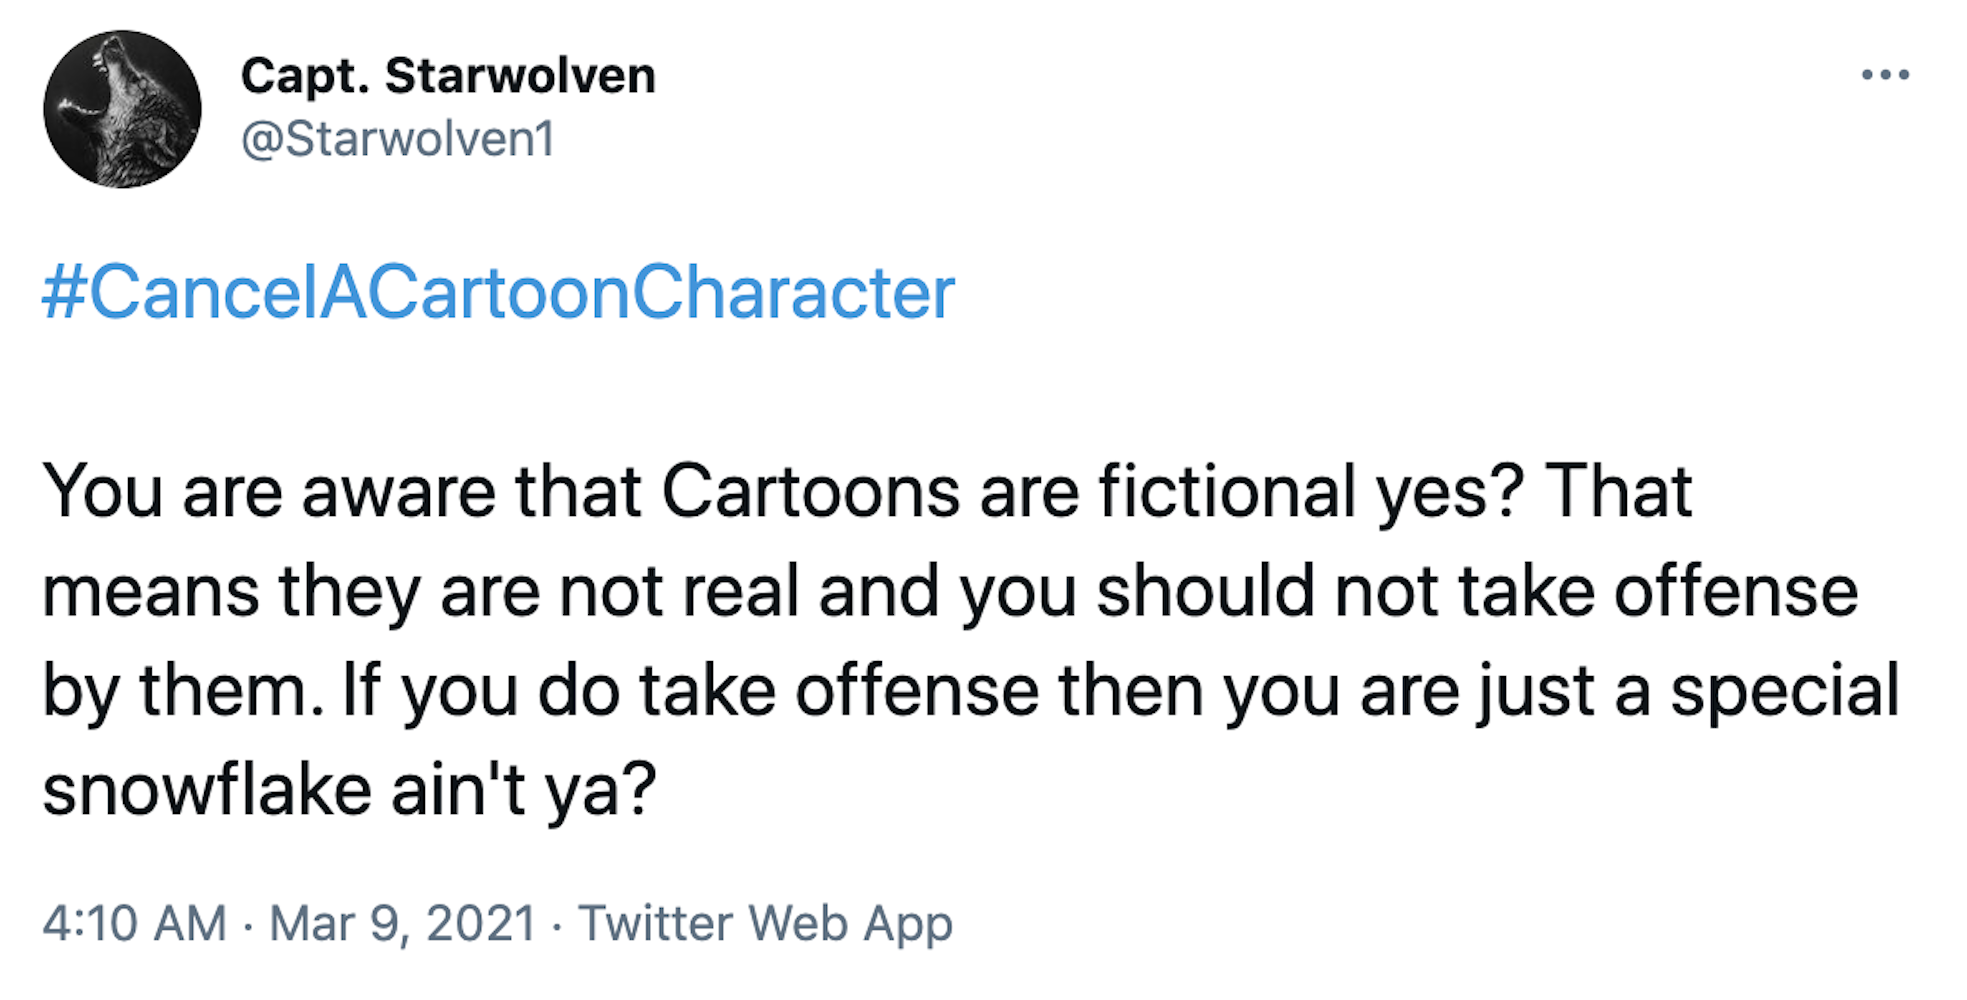 #CancelACartoonCharacter   You are aware that Cartoons are fictional yes? That means they are not real and you should not take offense by them. If you do take offense then you are just a special snowflake ain't ya?